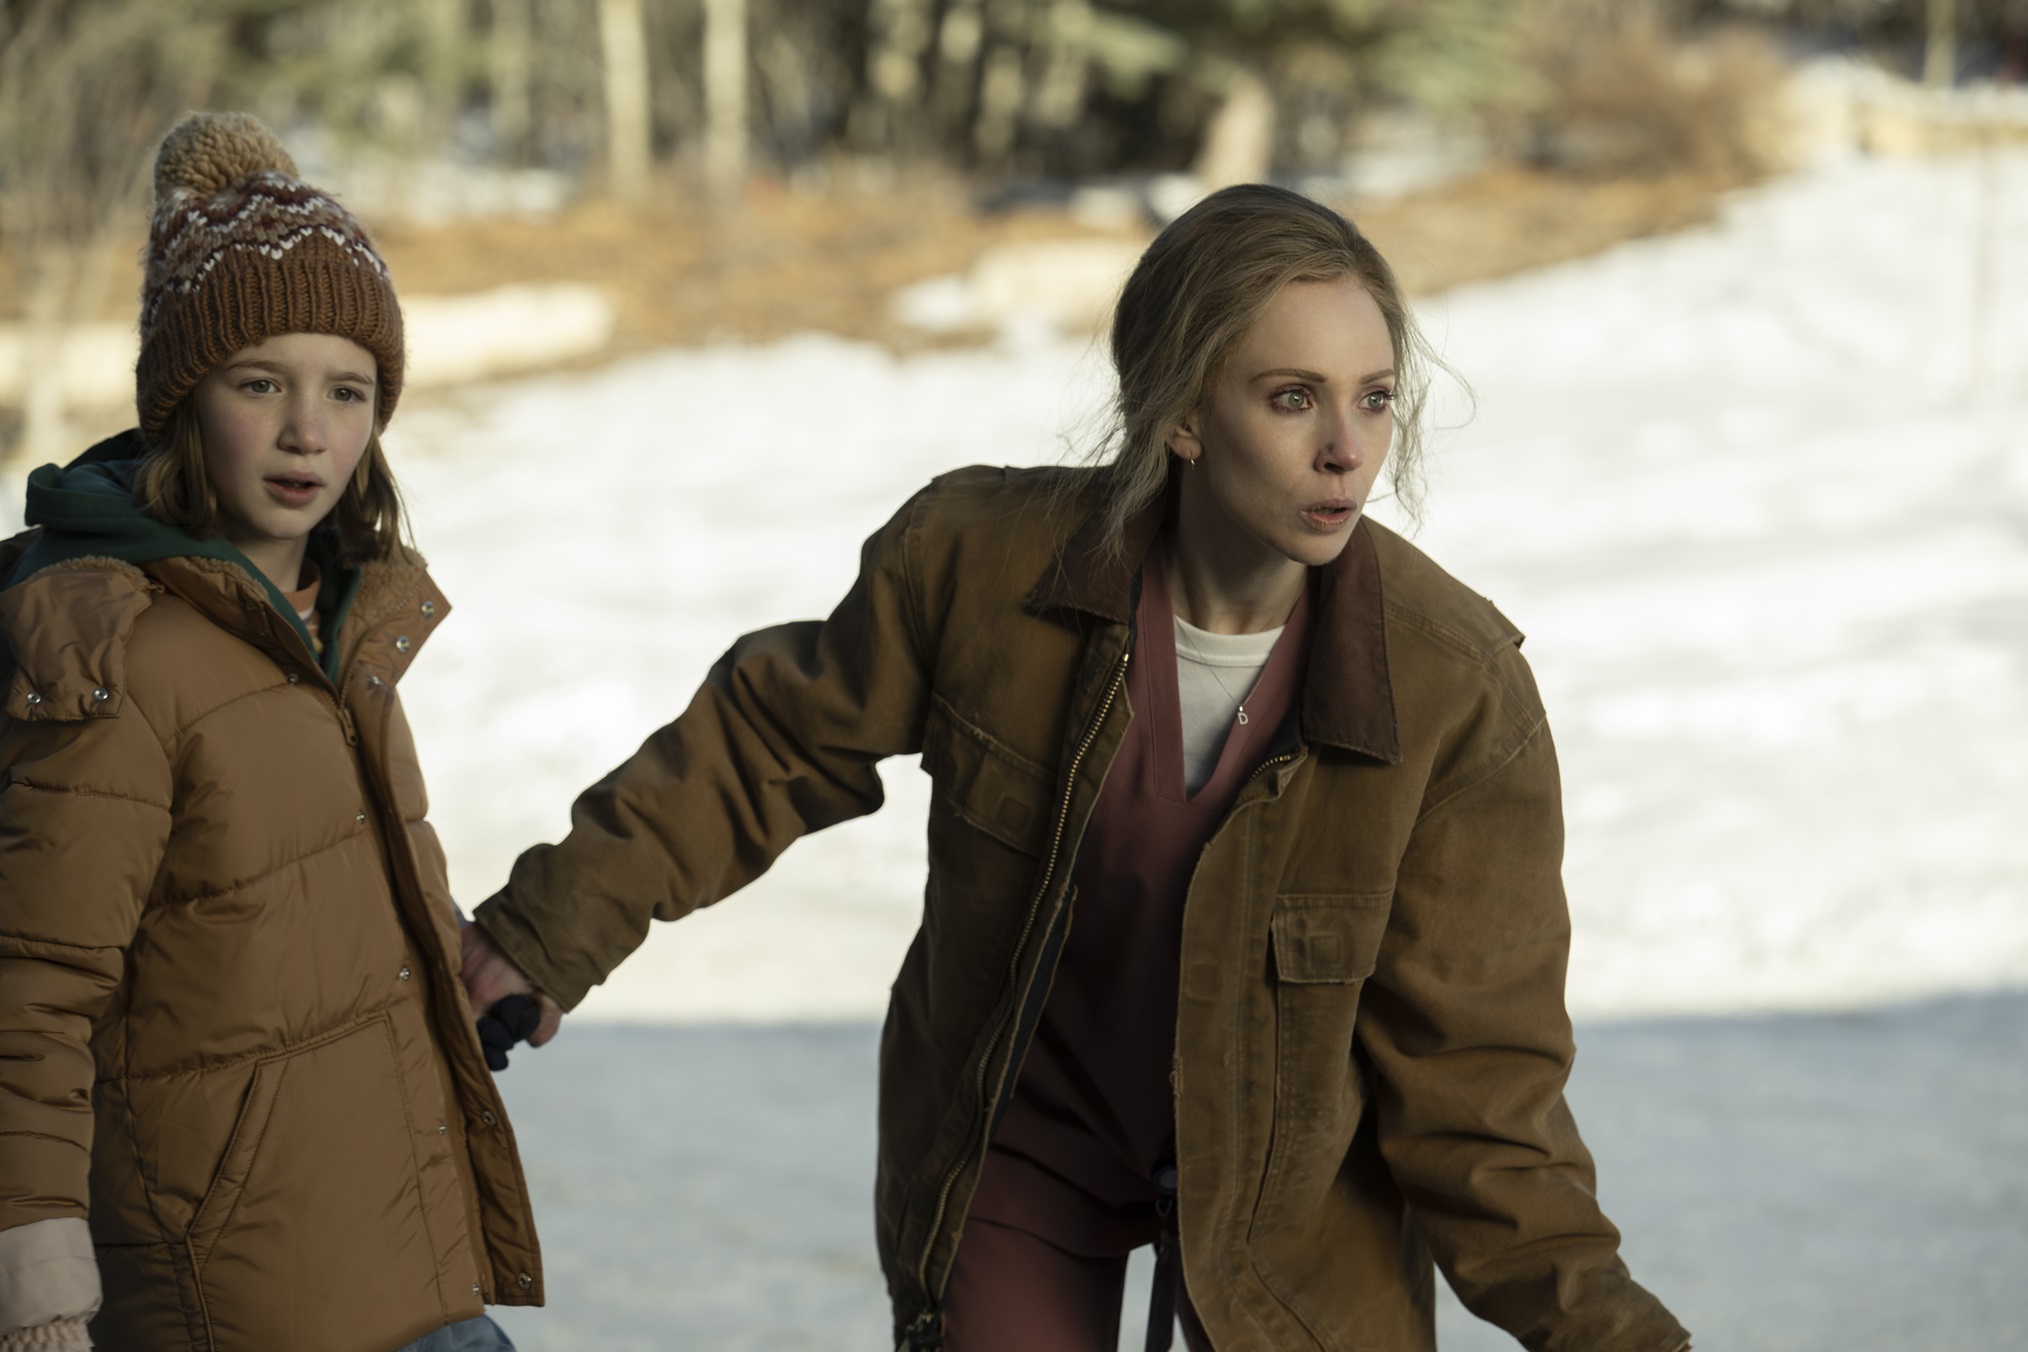 ‘Fargo’: Who Was Behind ‘The Tiger’ Narration?